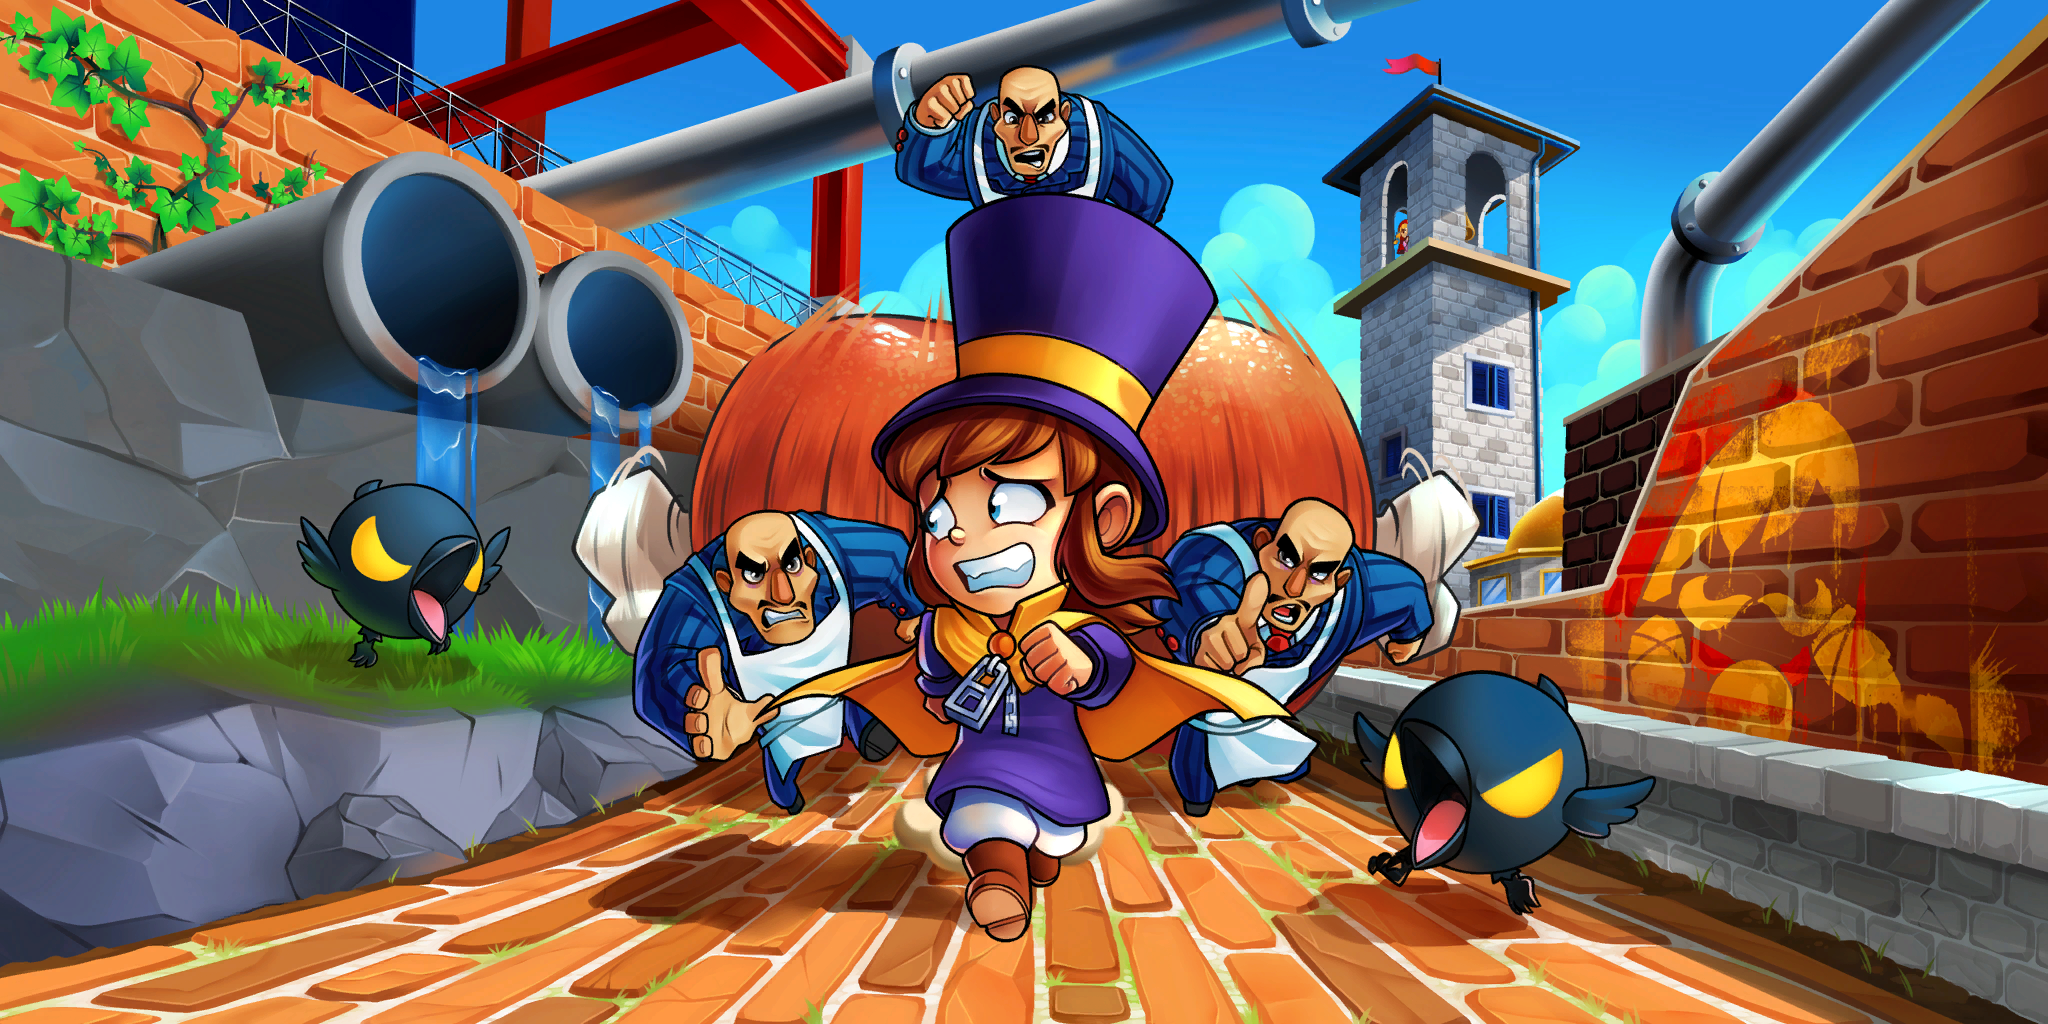 Battle of the Birds, A Hat in Time Wiki